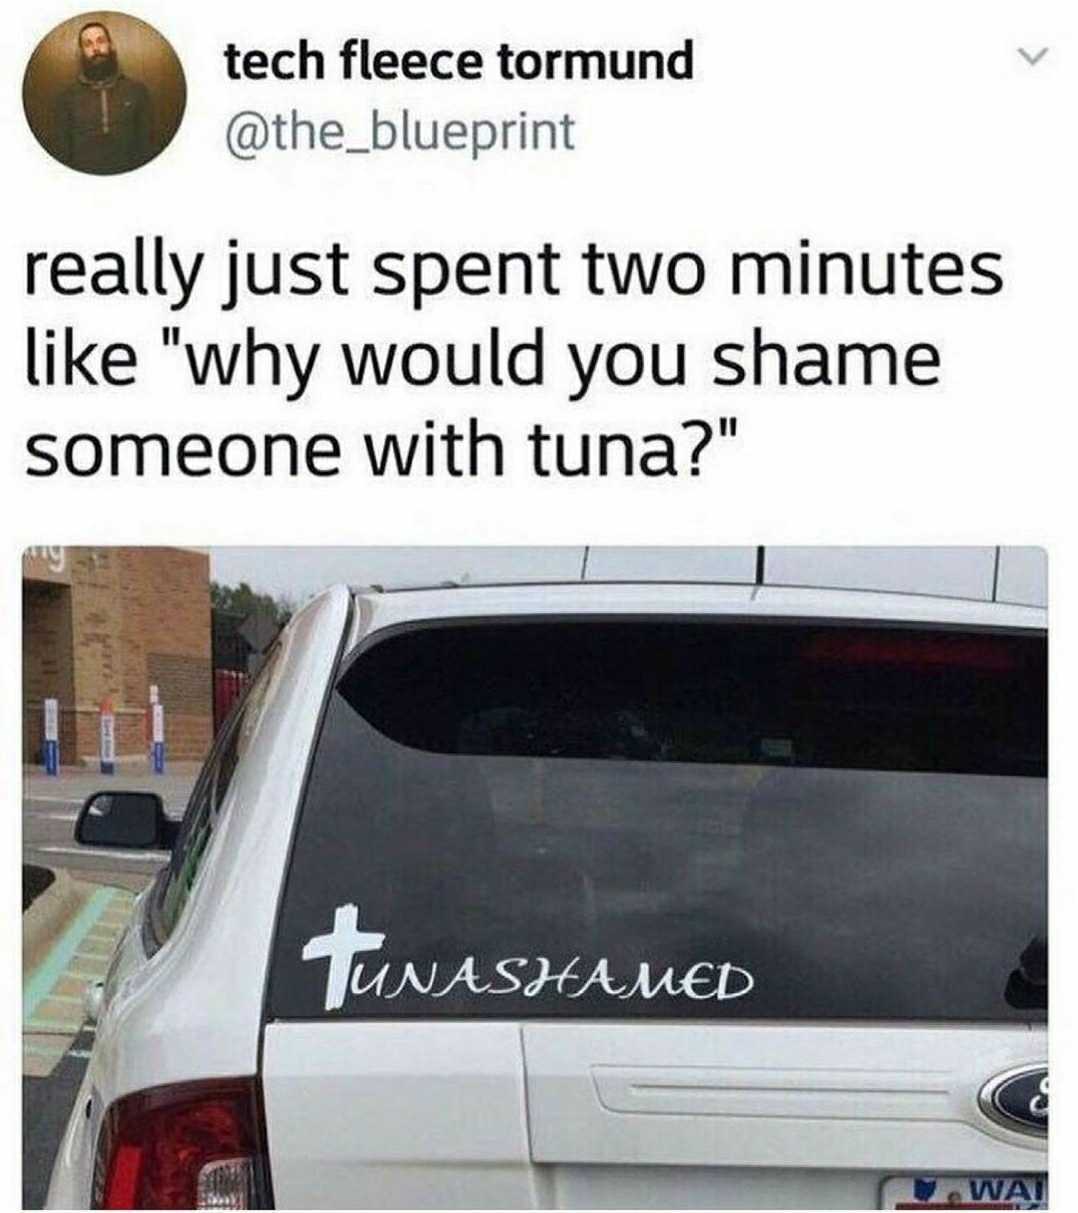 i'll have the spicy tunashamed roll, please